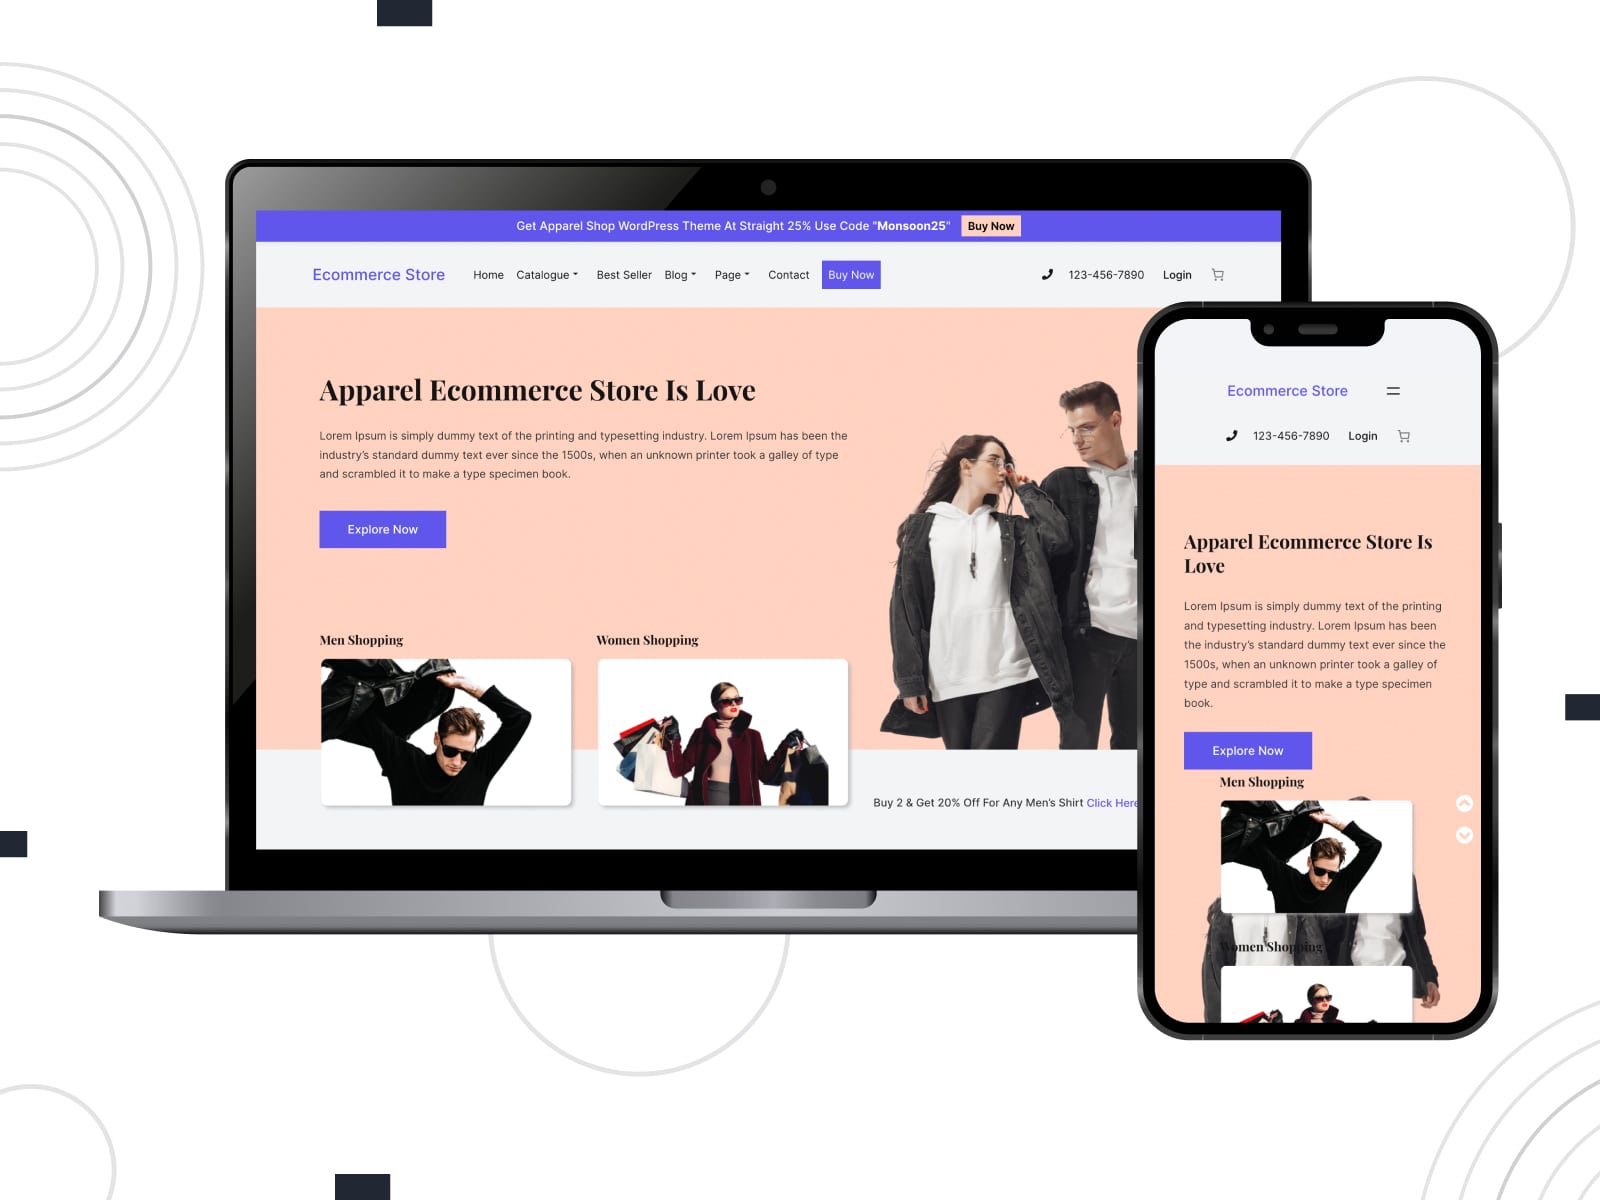 Picture of Apparel Ecommerce Store, one of the best free WordPress eCommerce themes with ready-made catalog categories.